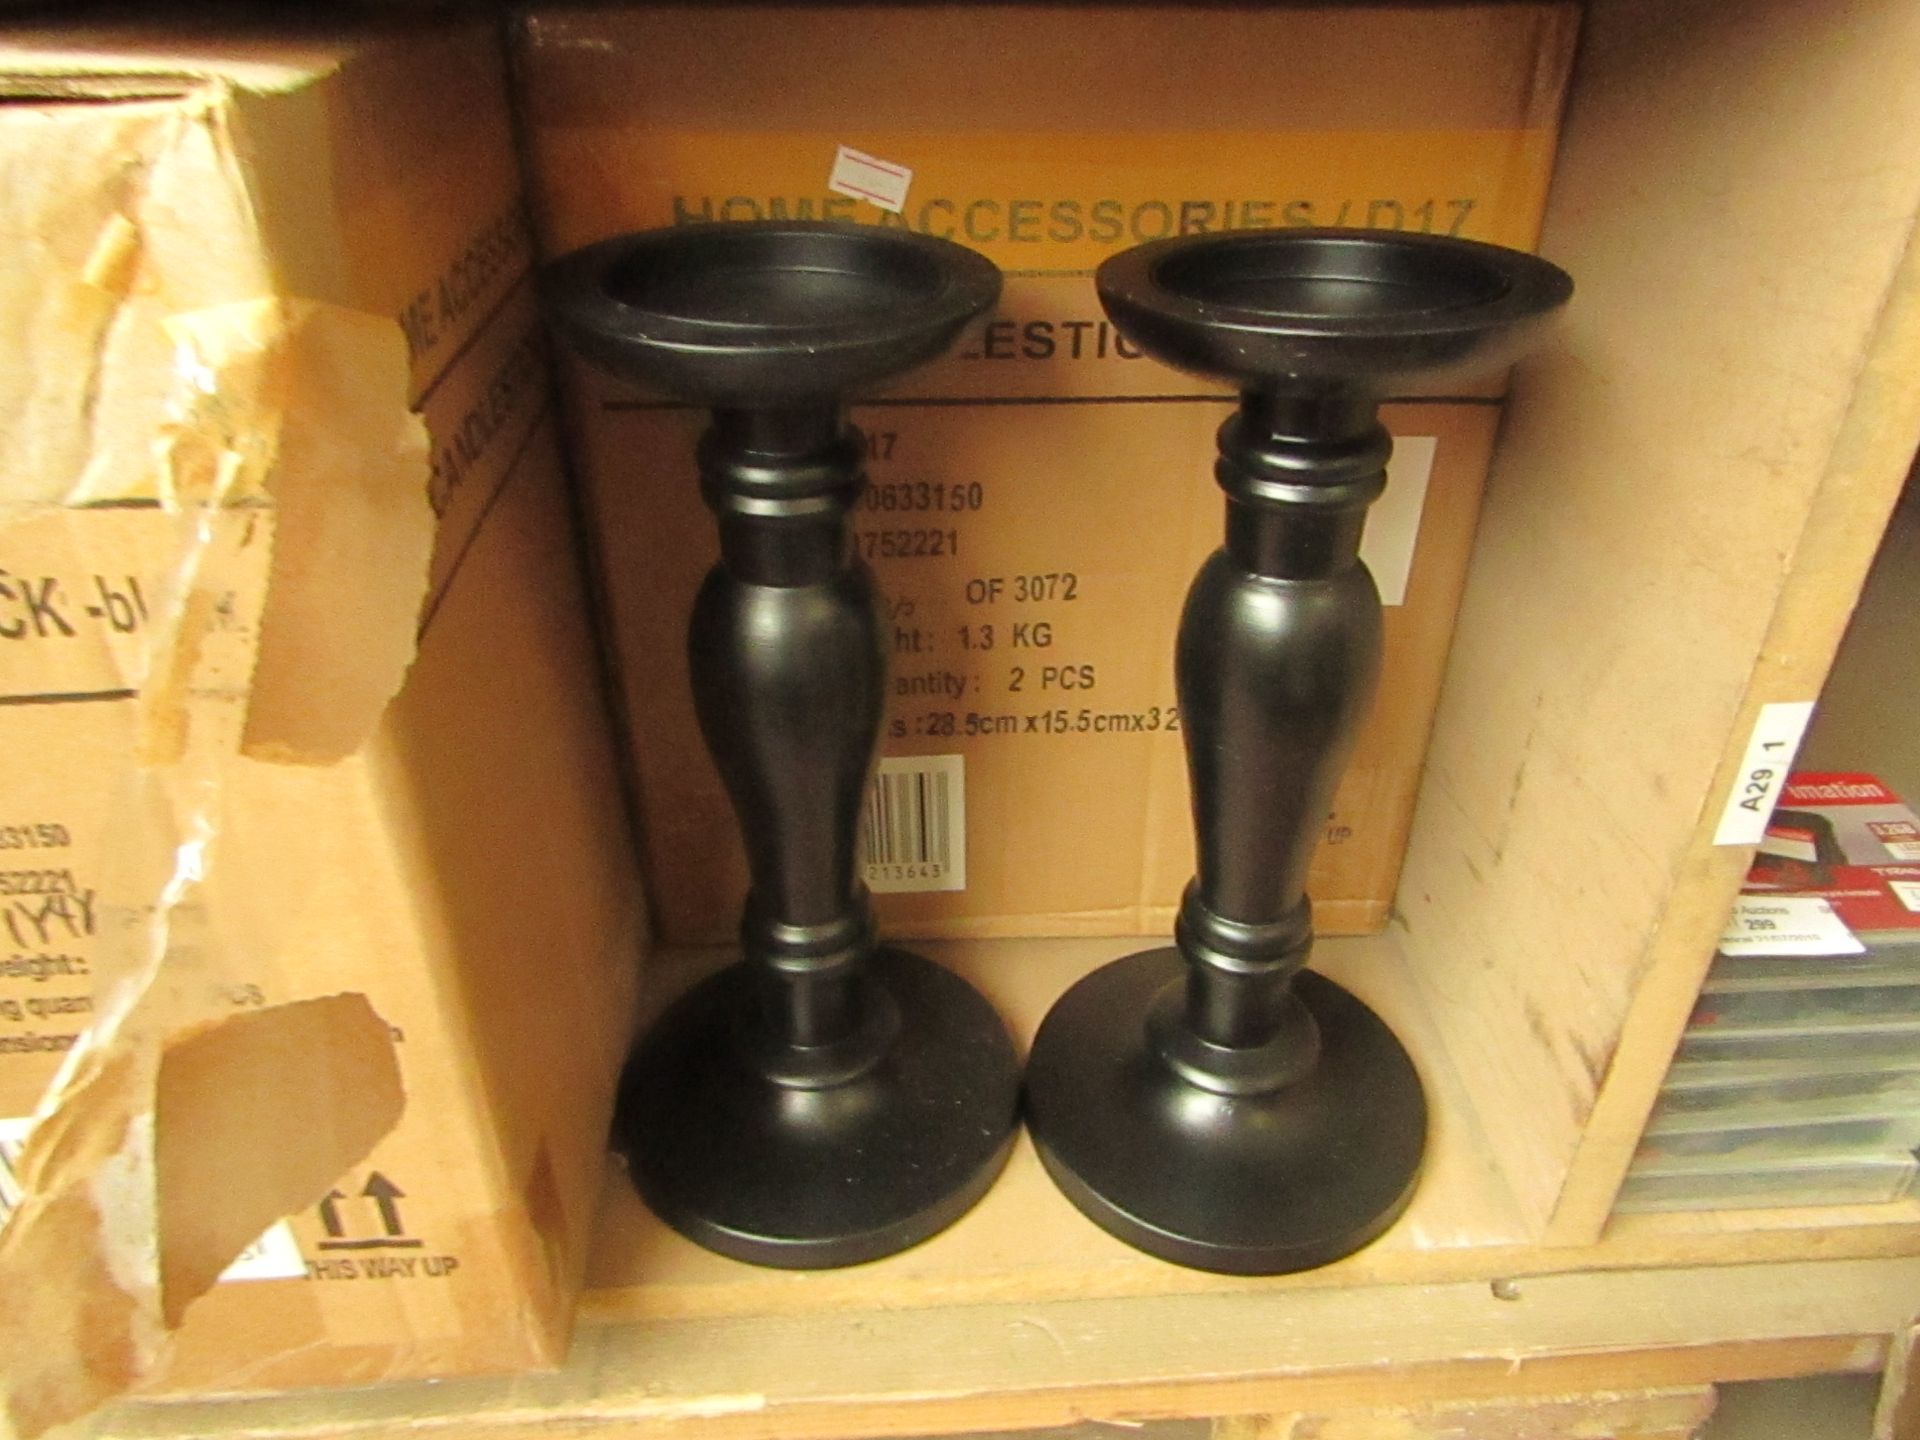 2 x Black candle sticks.New & Boxed